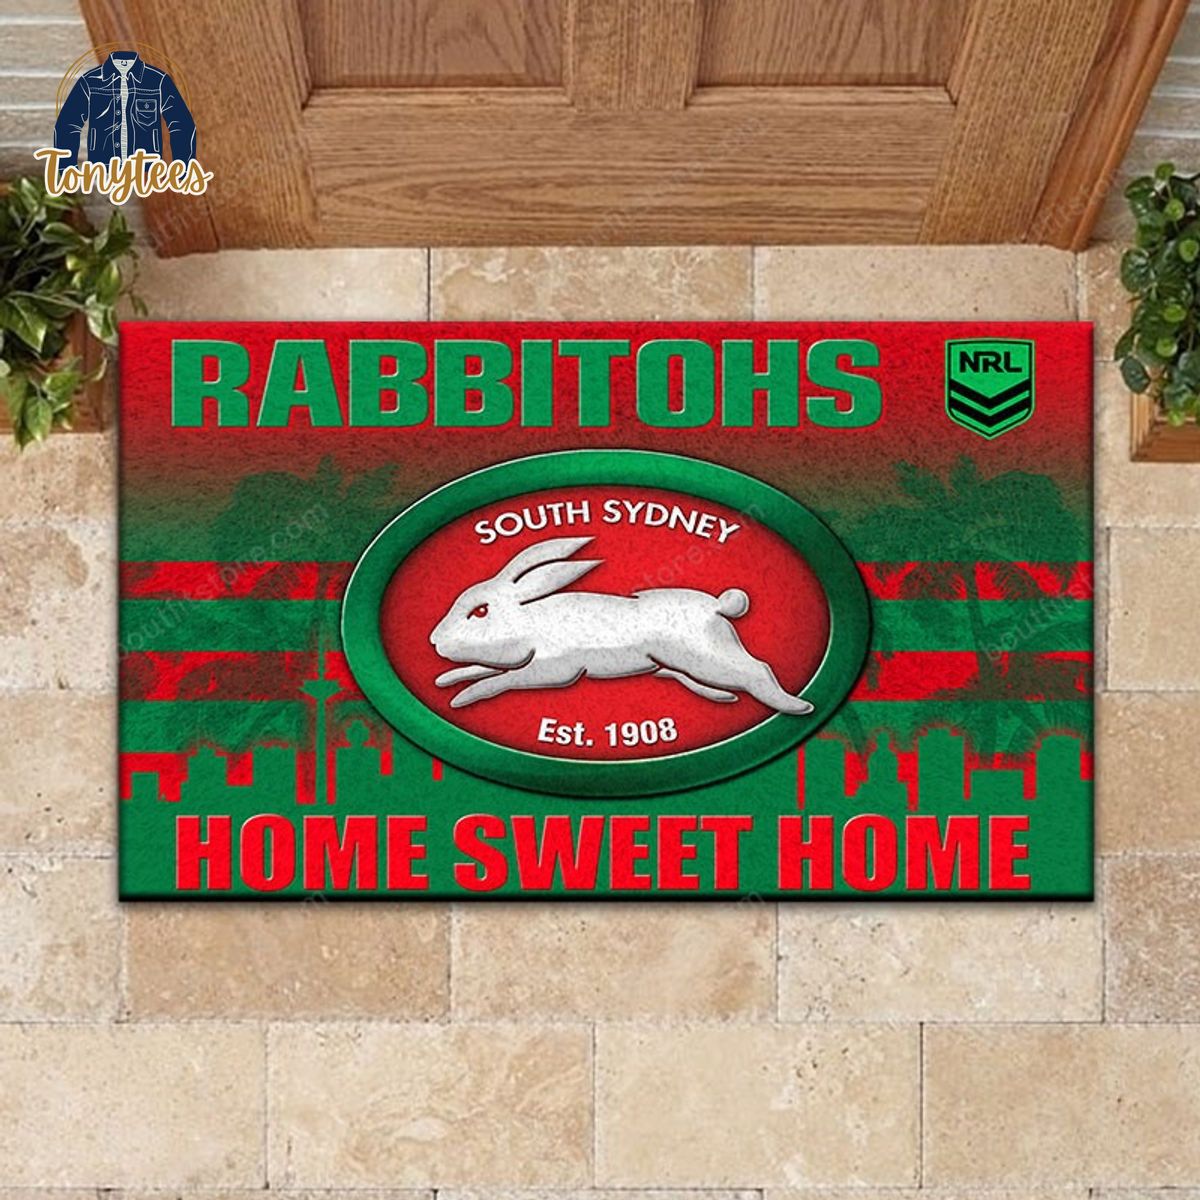 South Sydney Rabbitohs Home Sweet Home Doormat